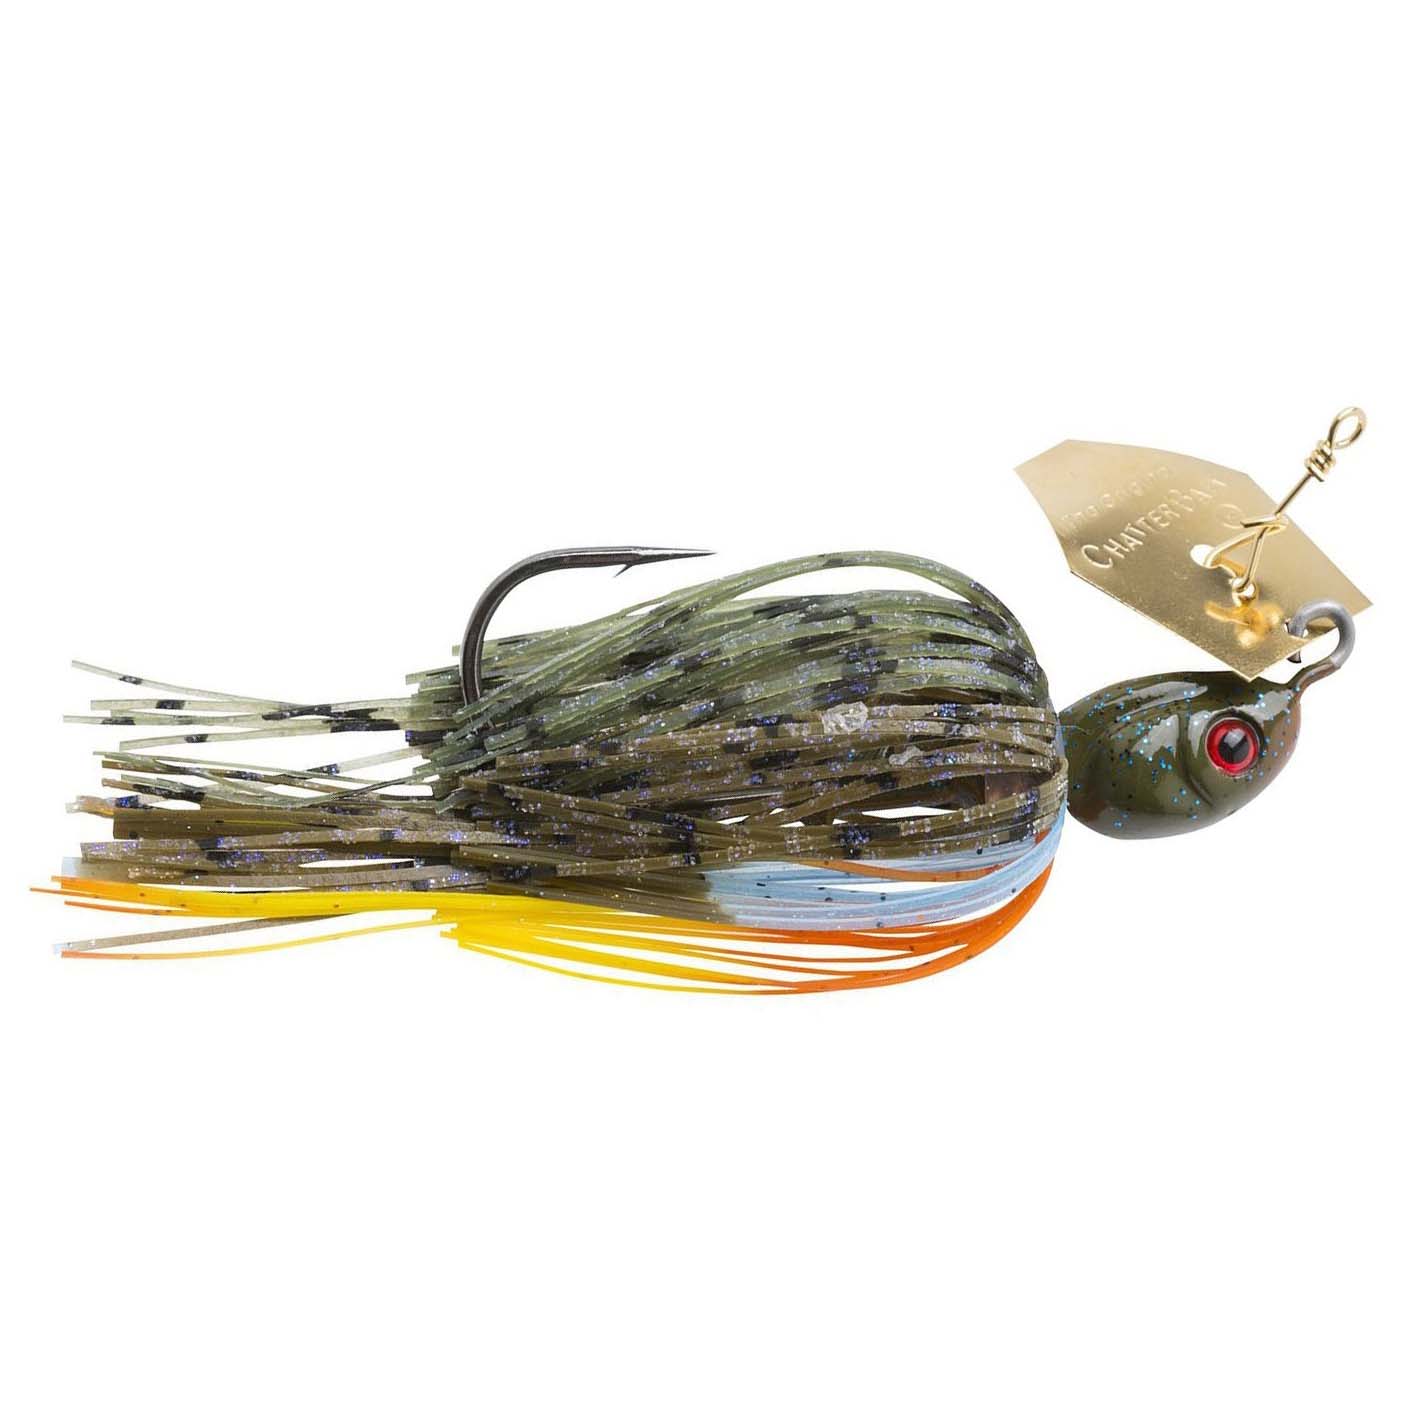 Z Man Project Z ChatterBait 3/8 oz. Bass Fishing Lure — Discount